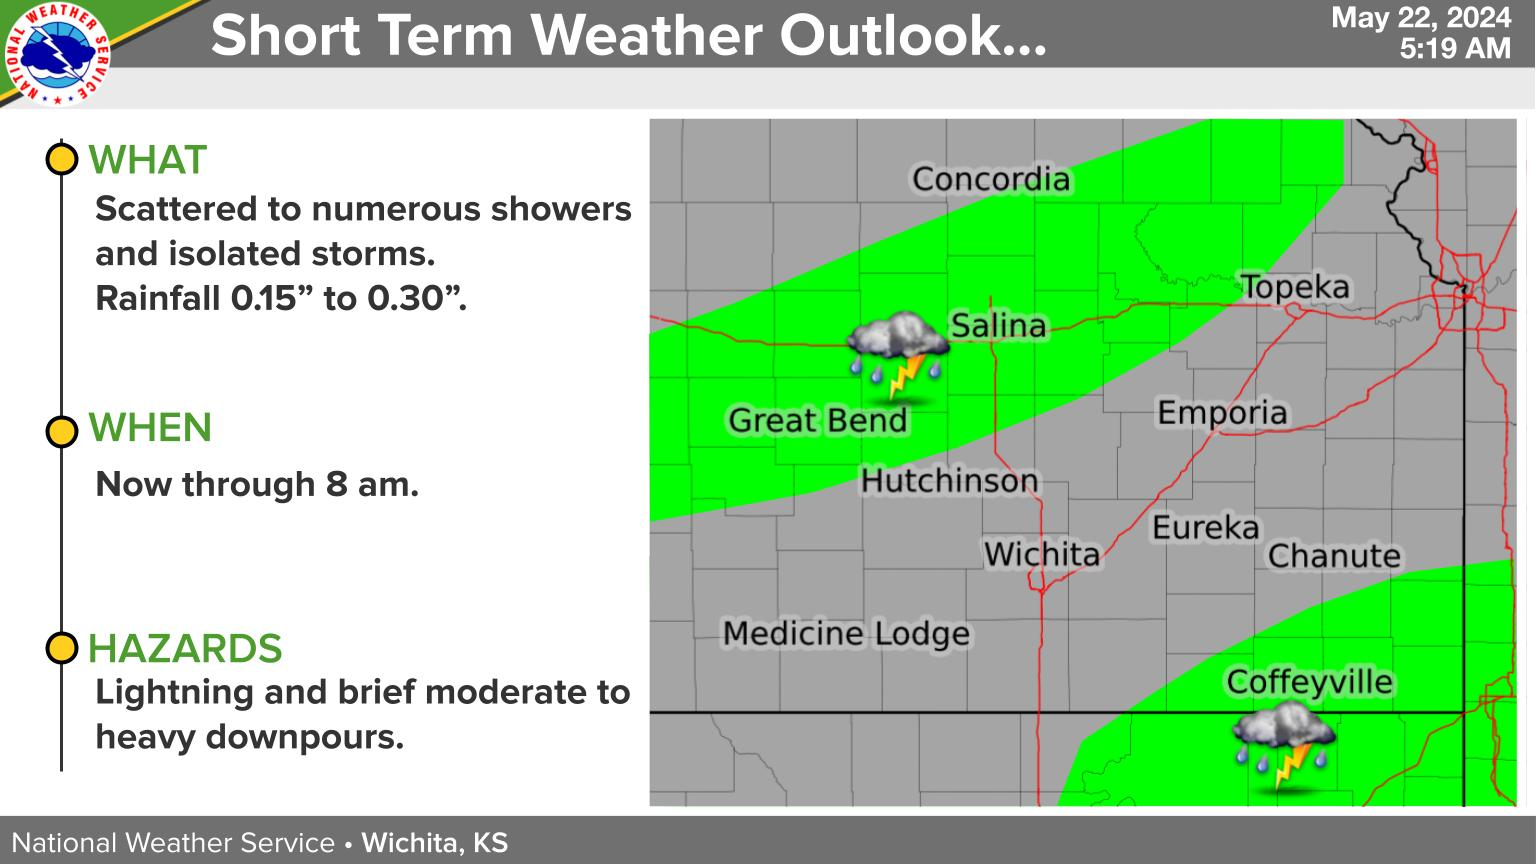 Thunderstorms expected in Eastern Kansas with potential dime-sized hail